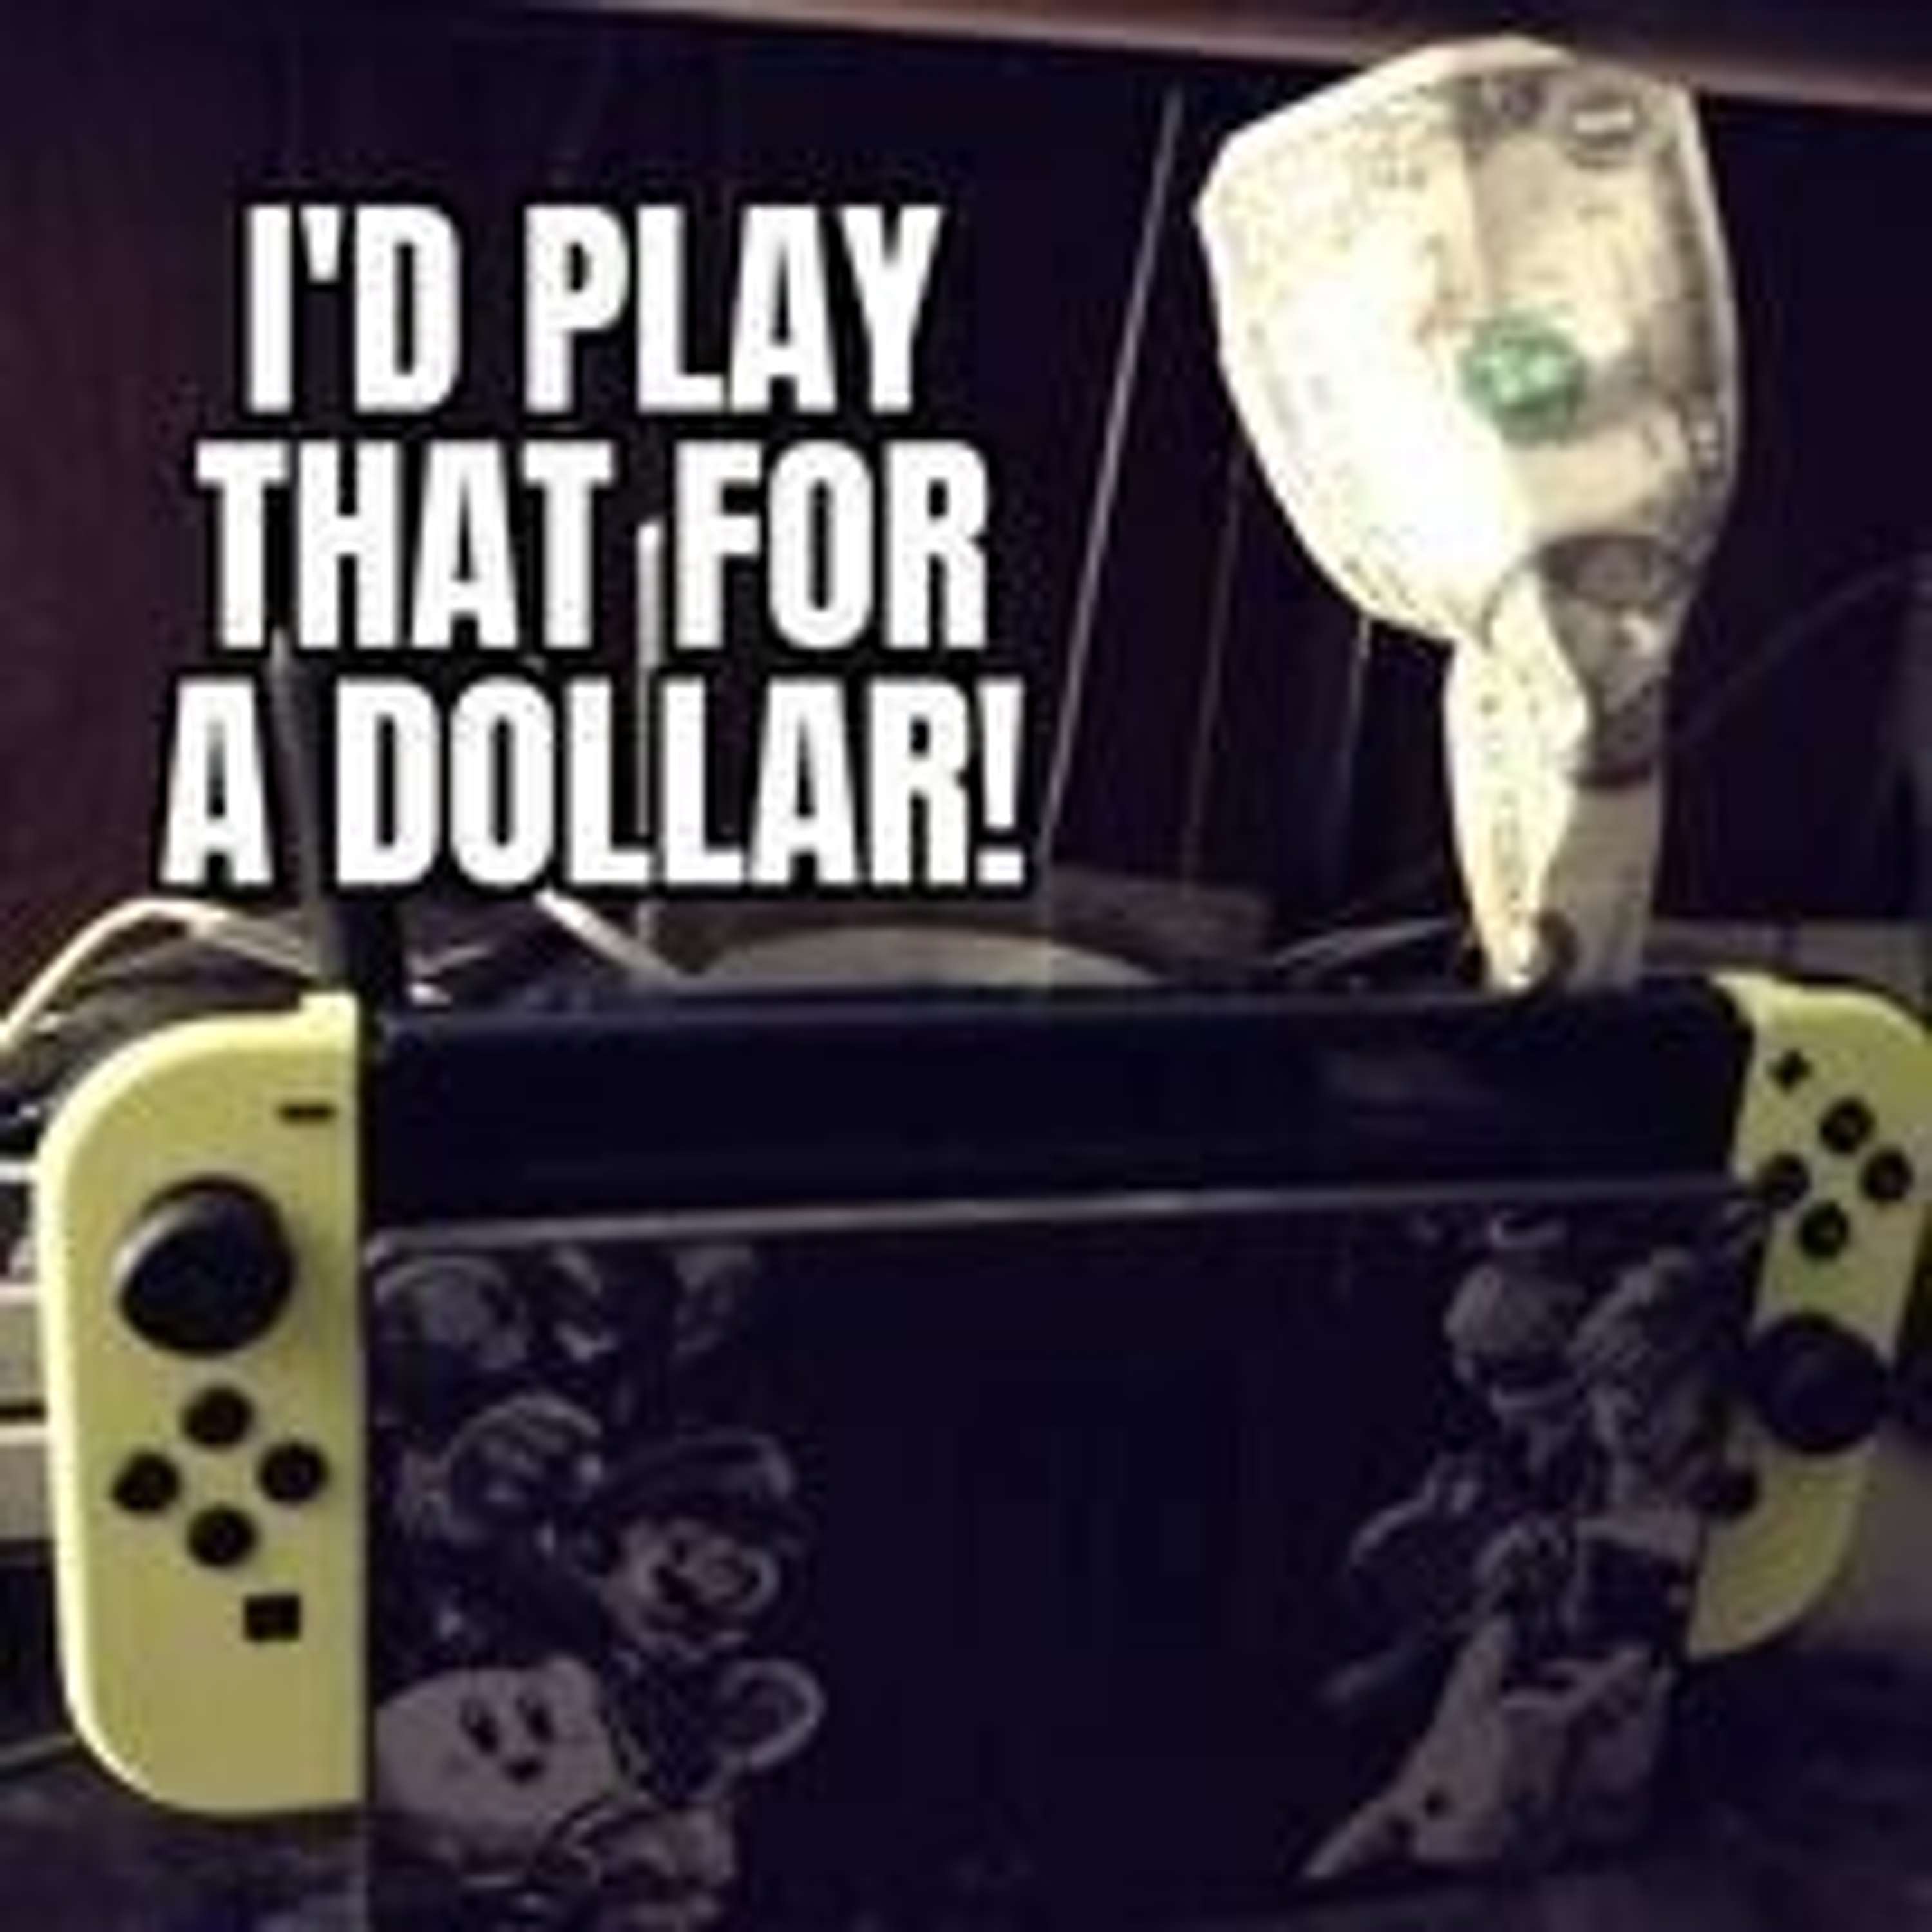 I’d Play That For A Dollar: Twenty Two Cents Short